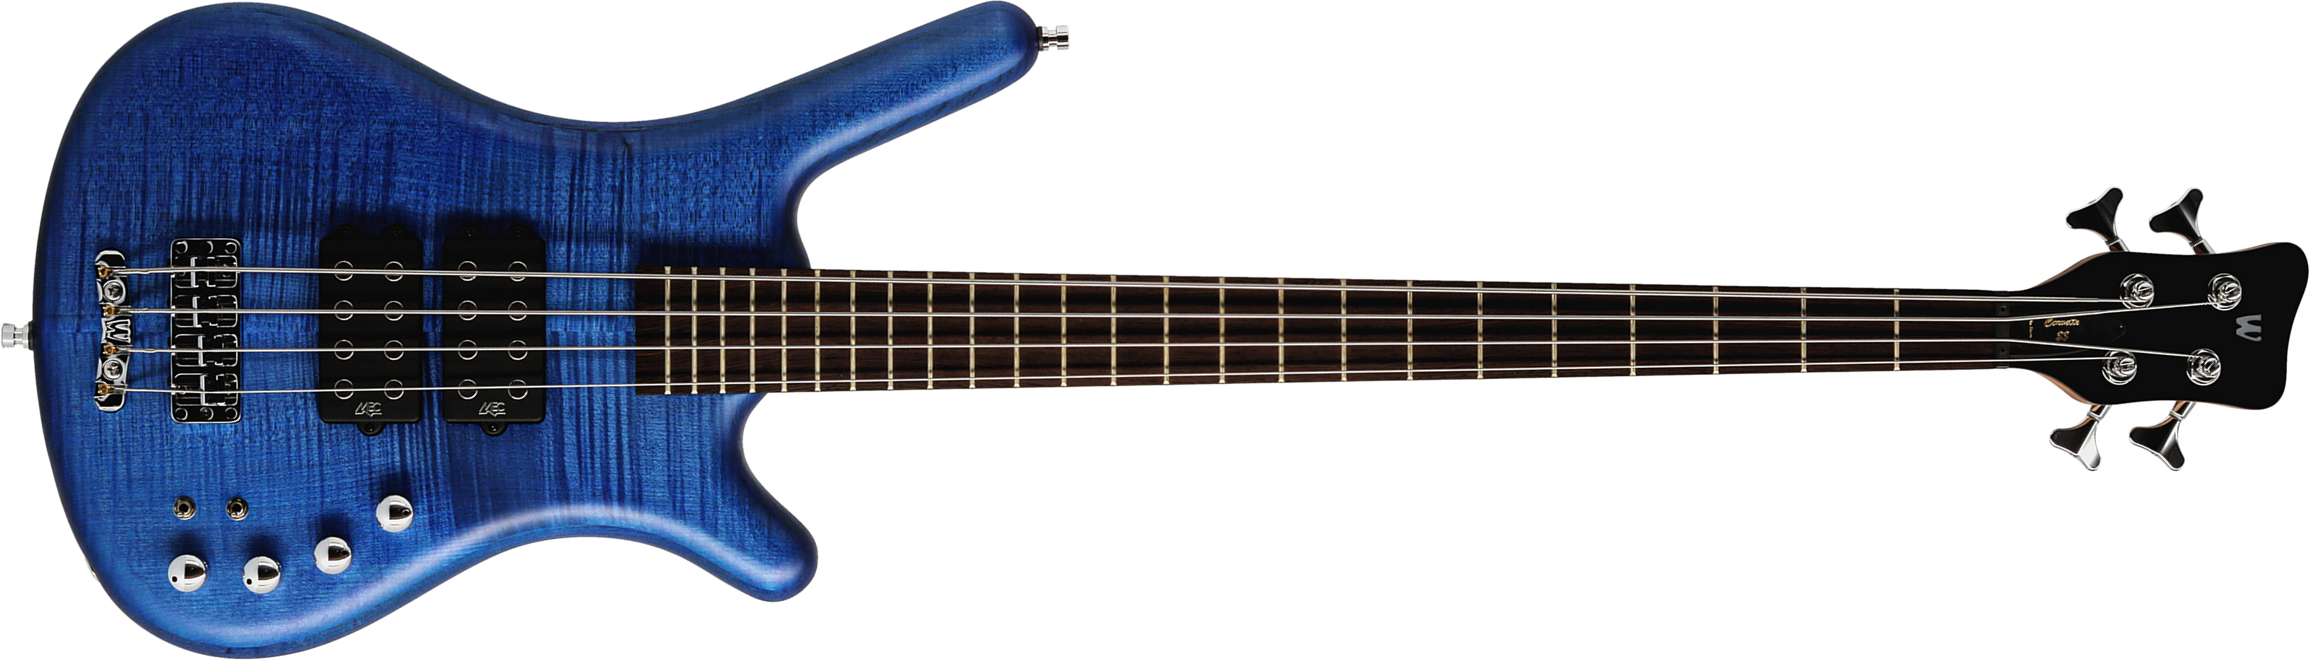 Warwick Corvette $$  4-string Pro Gps Active Wen - Ocean Blue - Solid body electric bass - Main picture